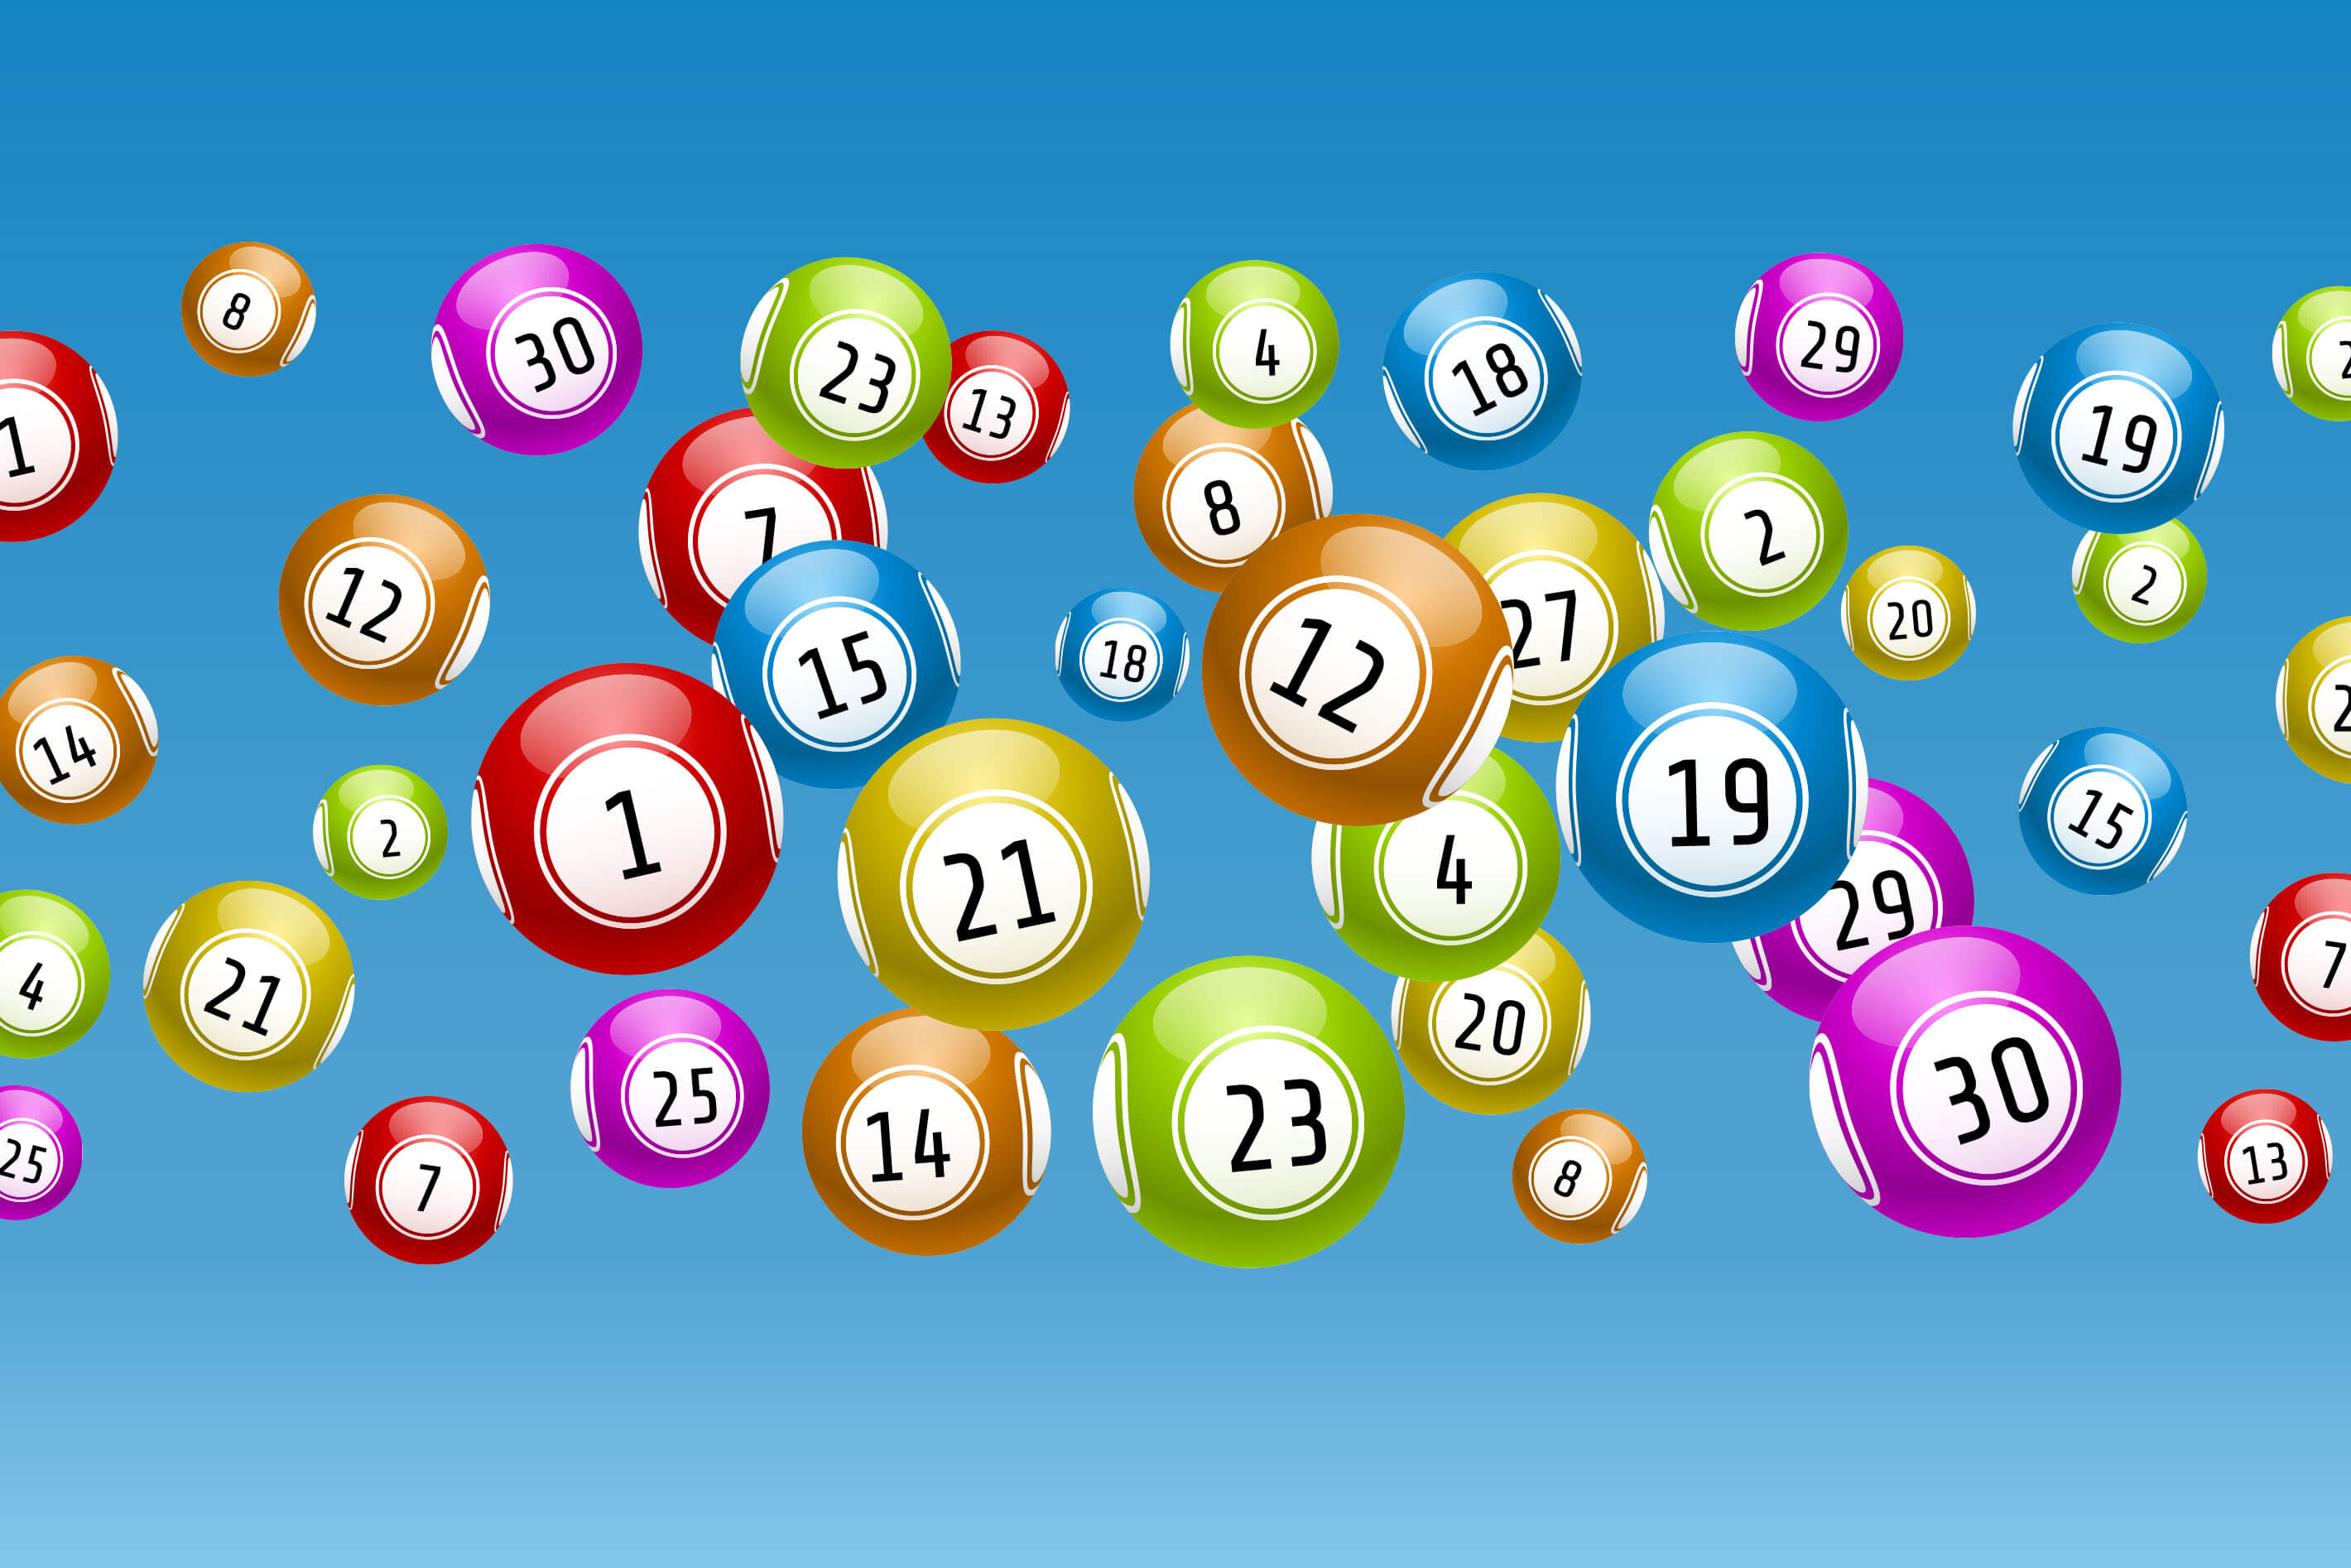 leo lucky numbers for lotto